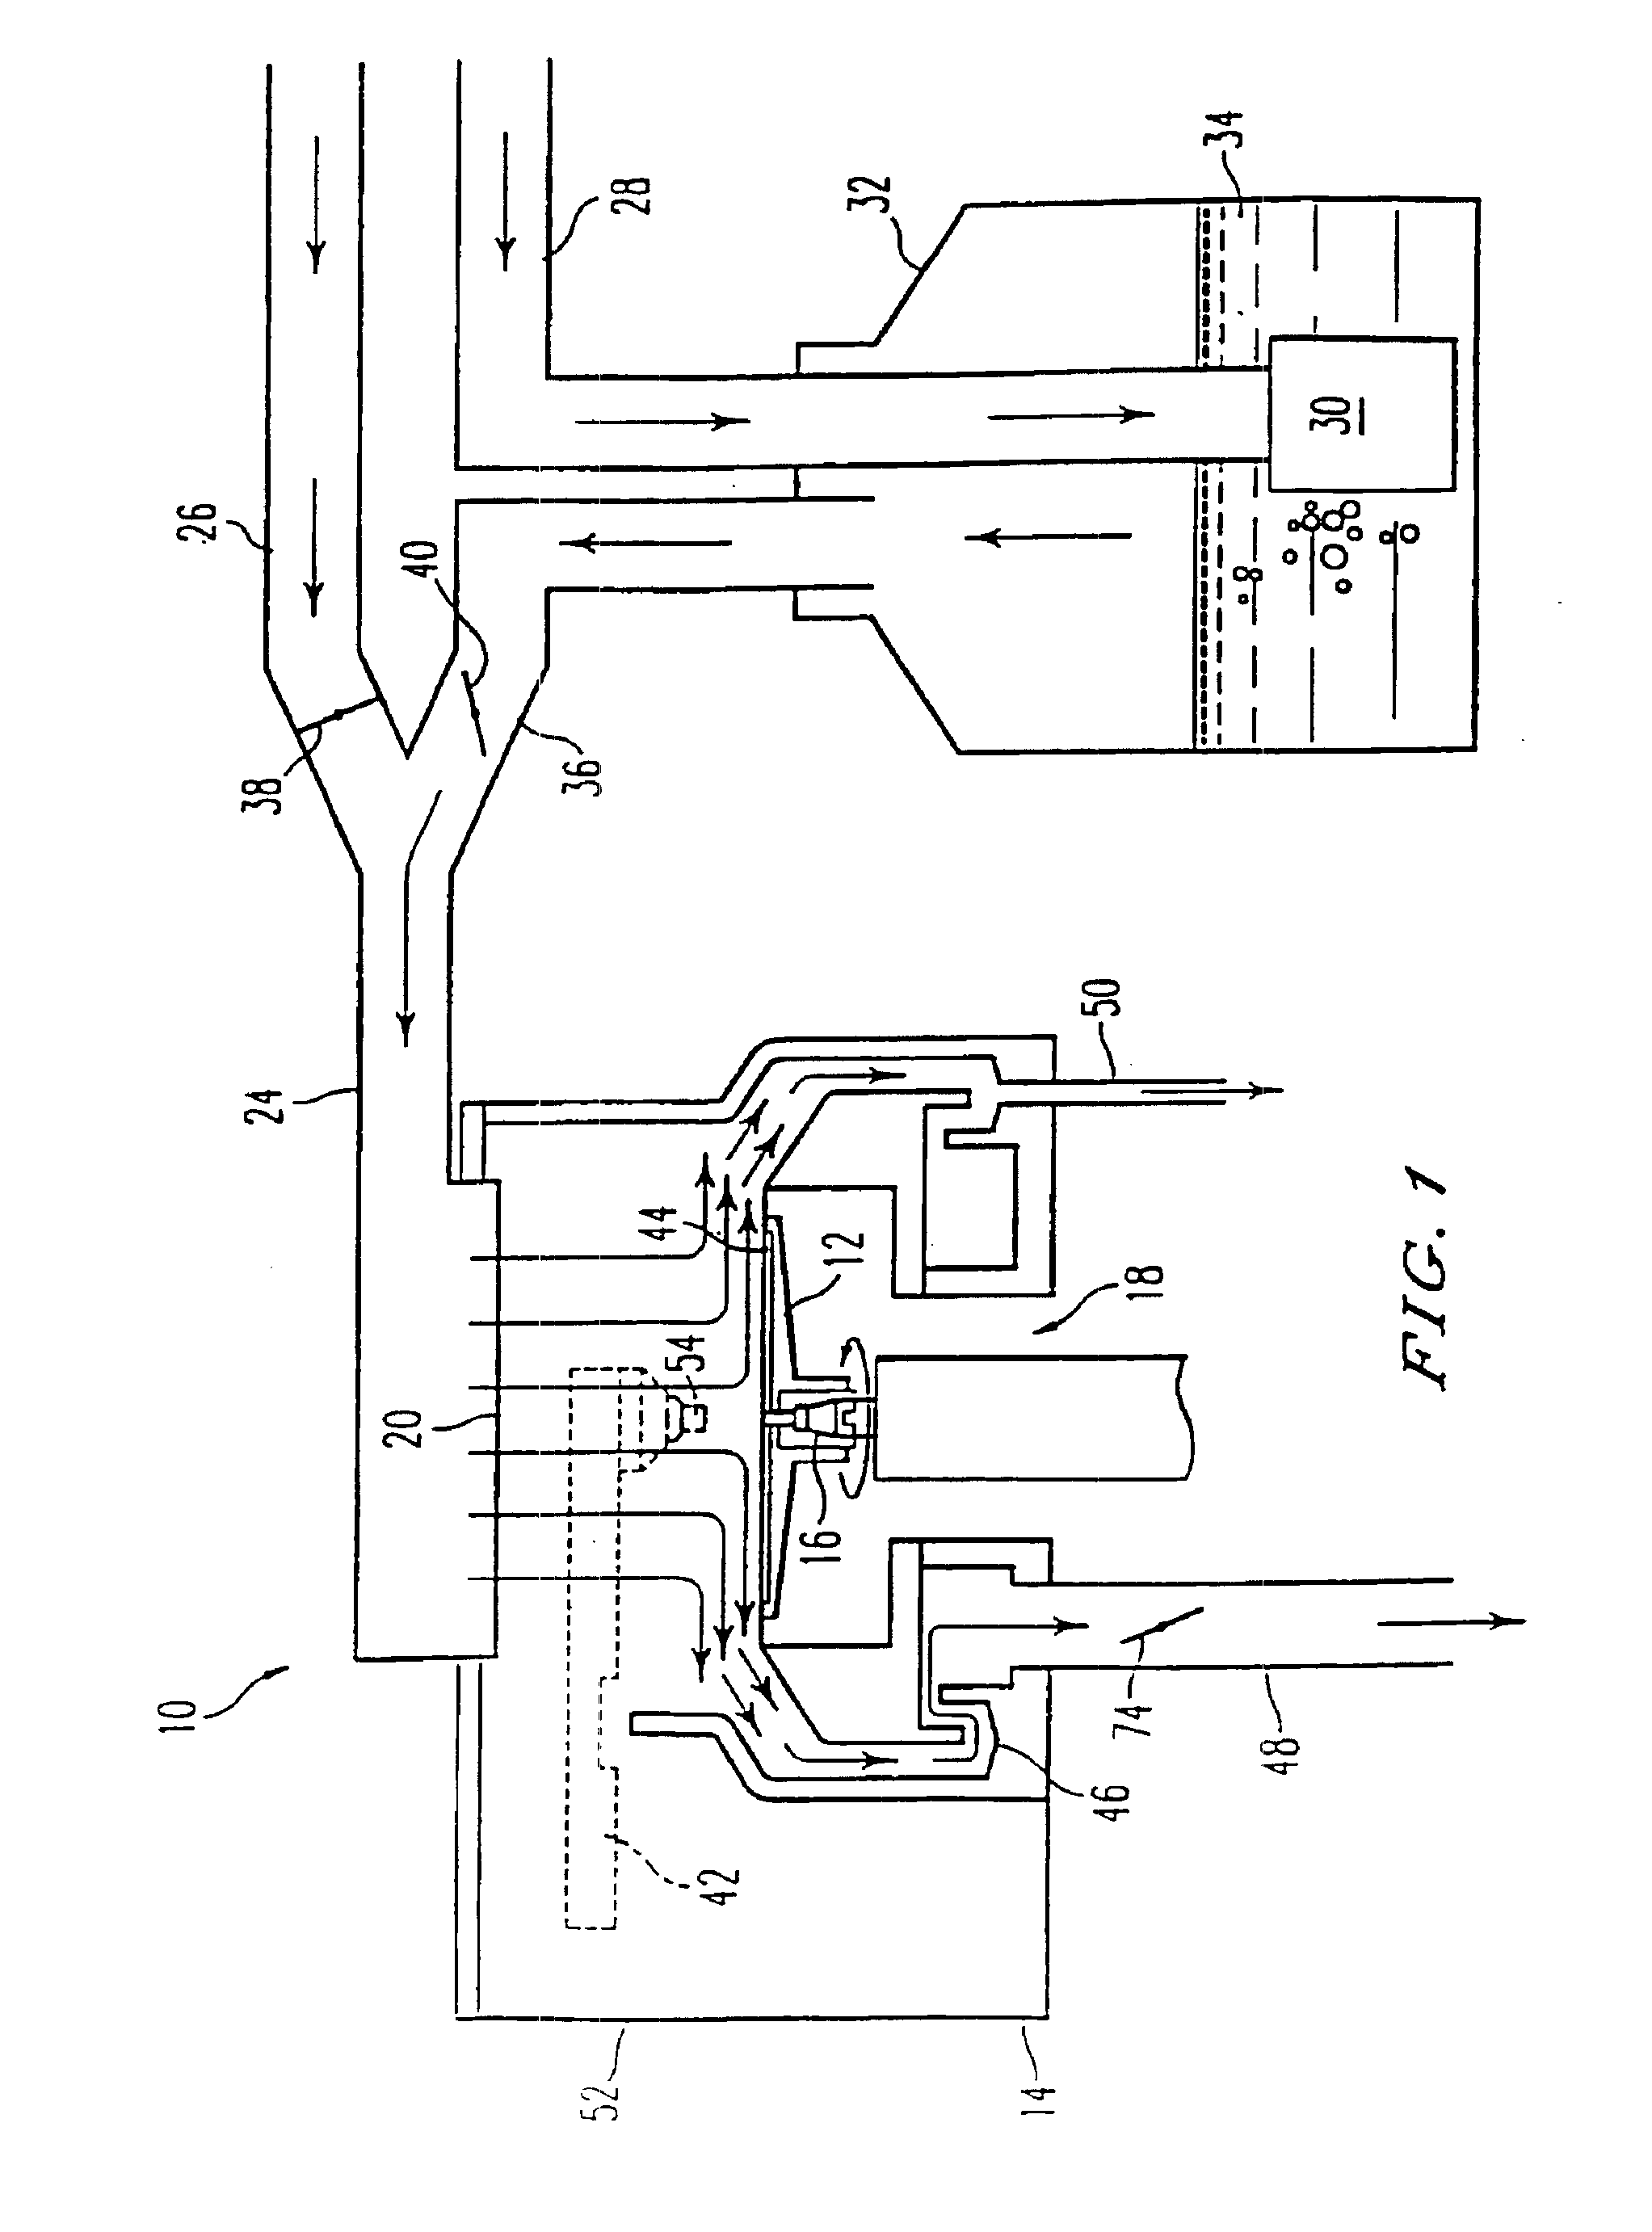 Method of uniformly coating a substrate